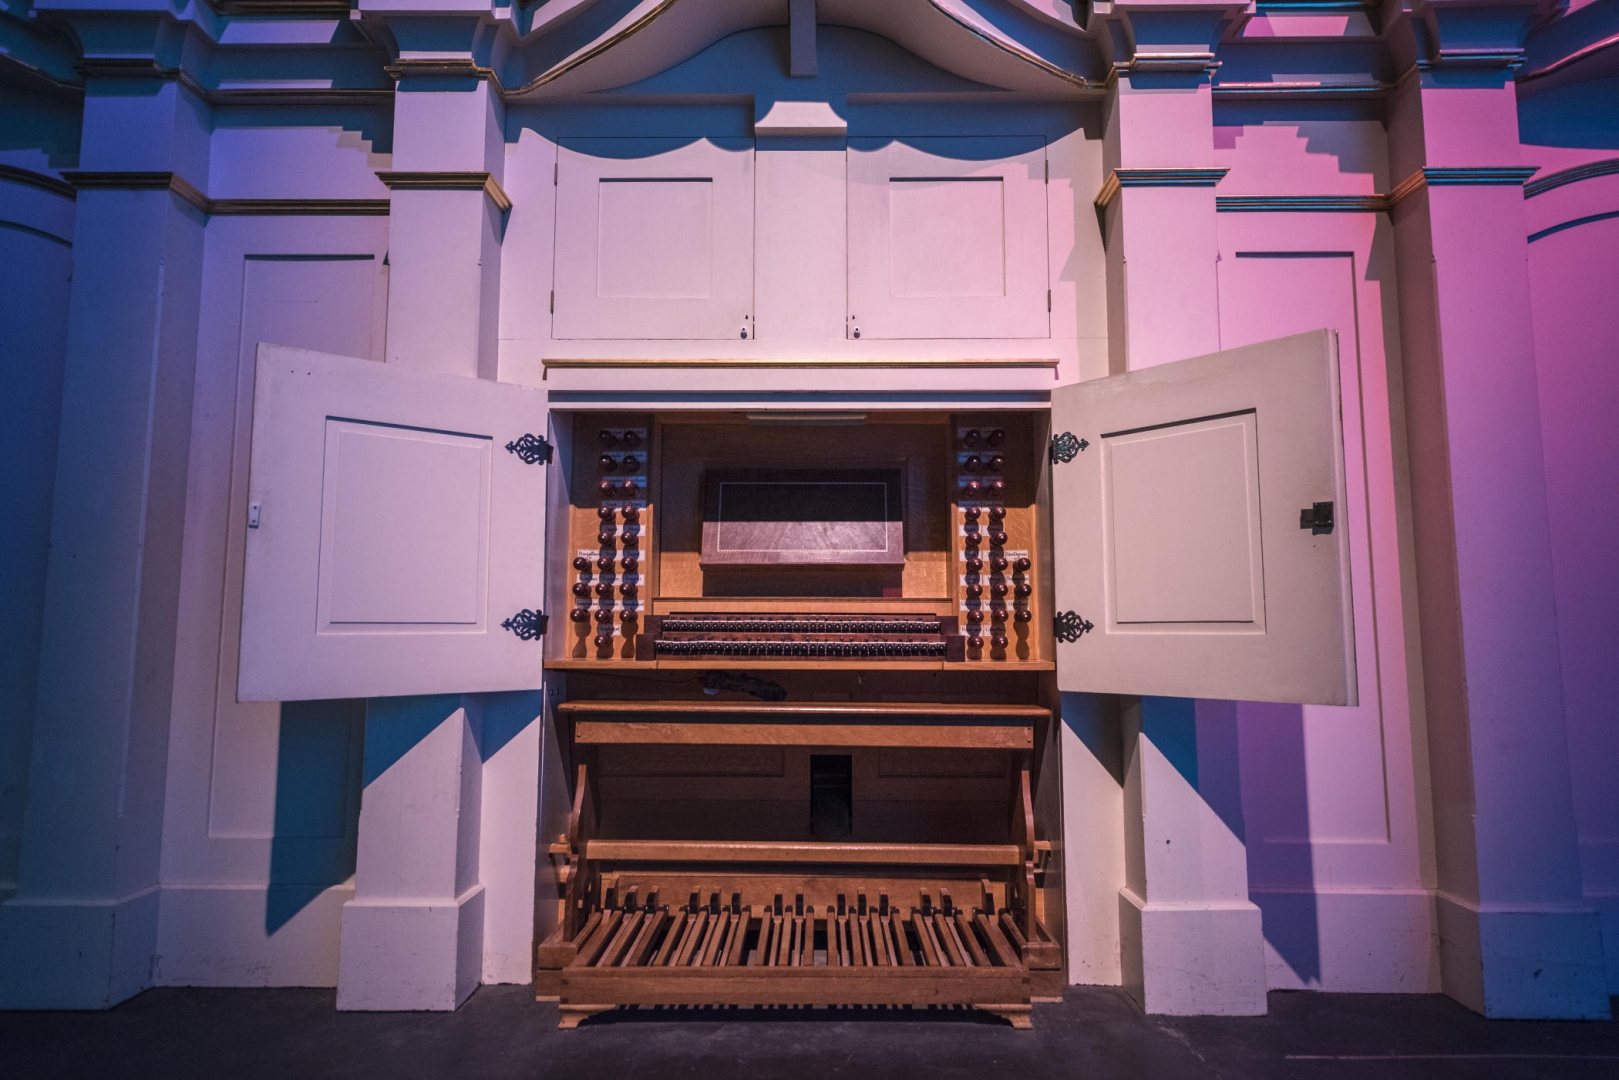 A view of the organ